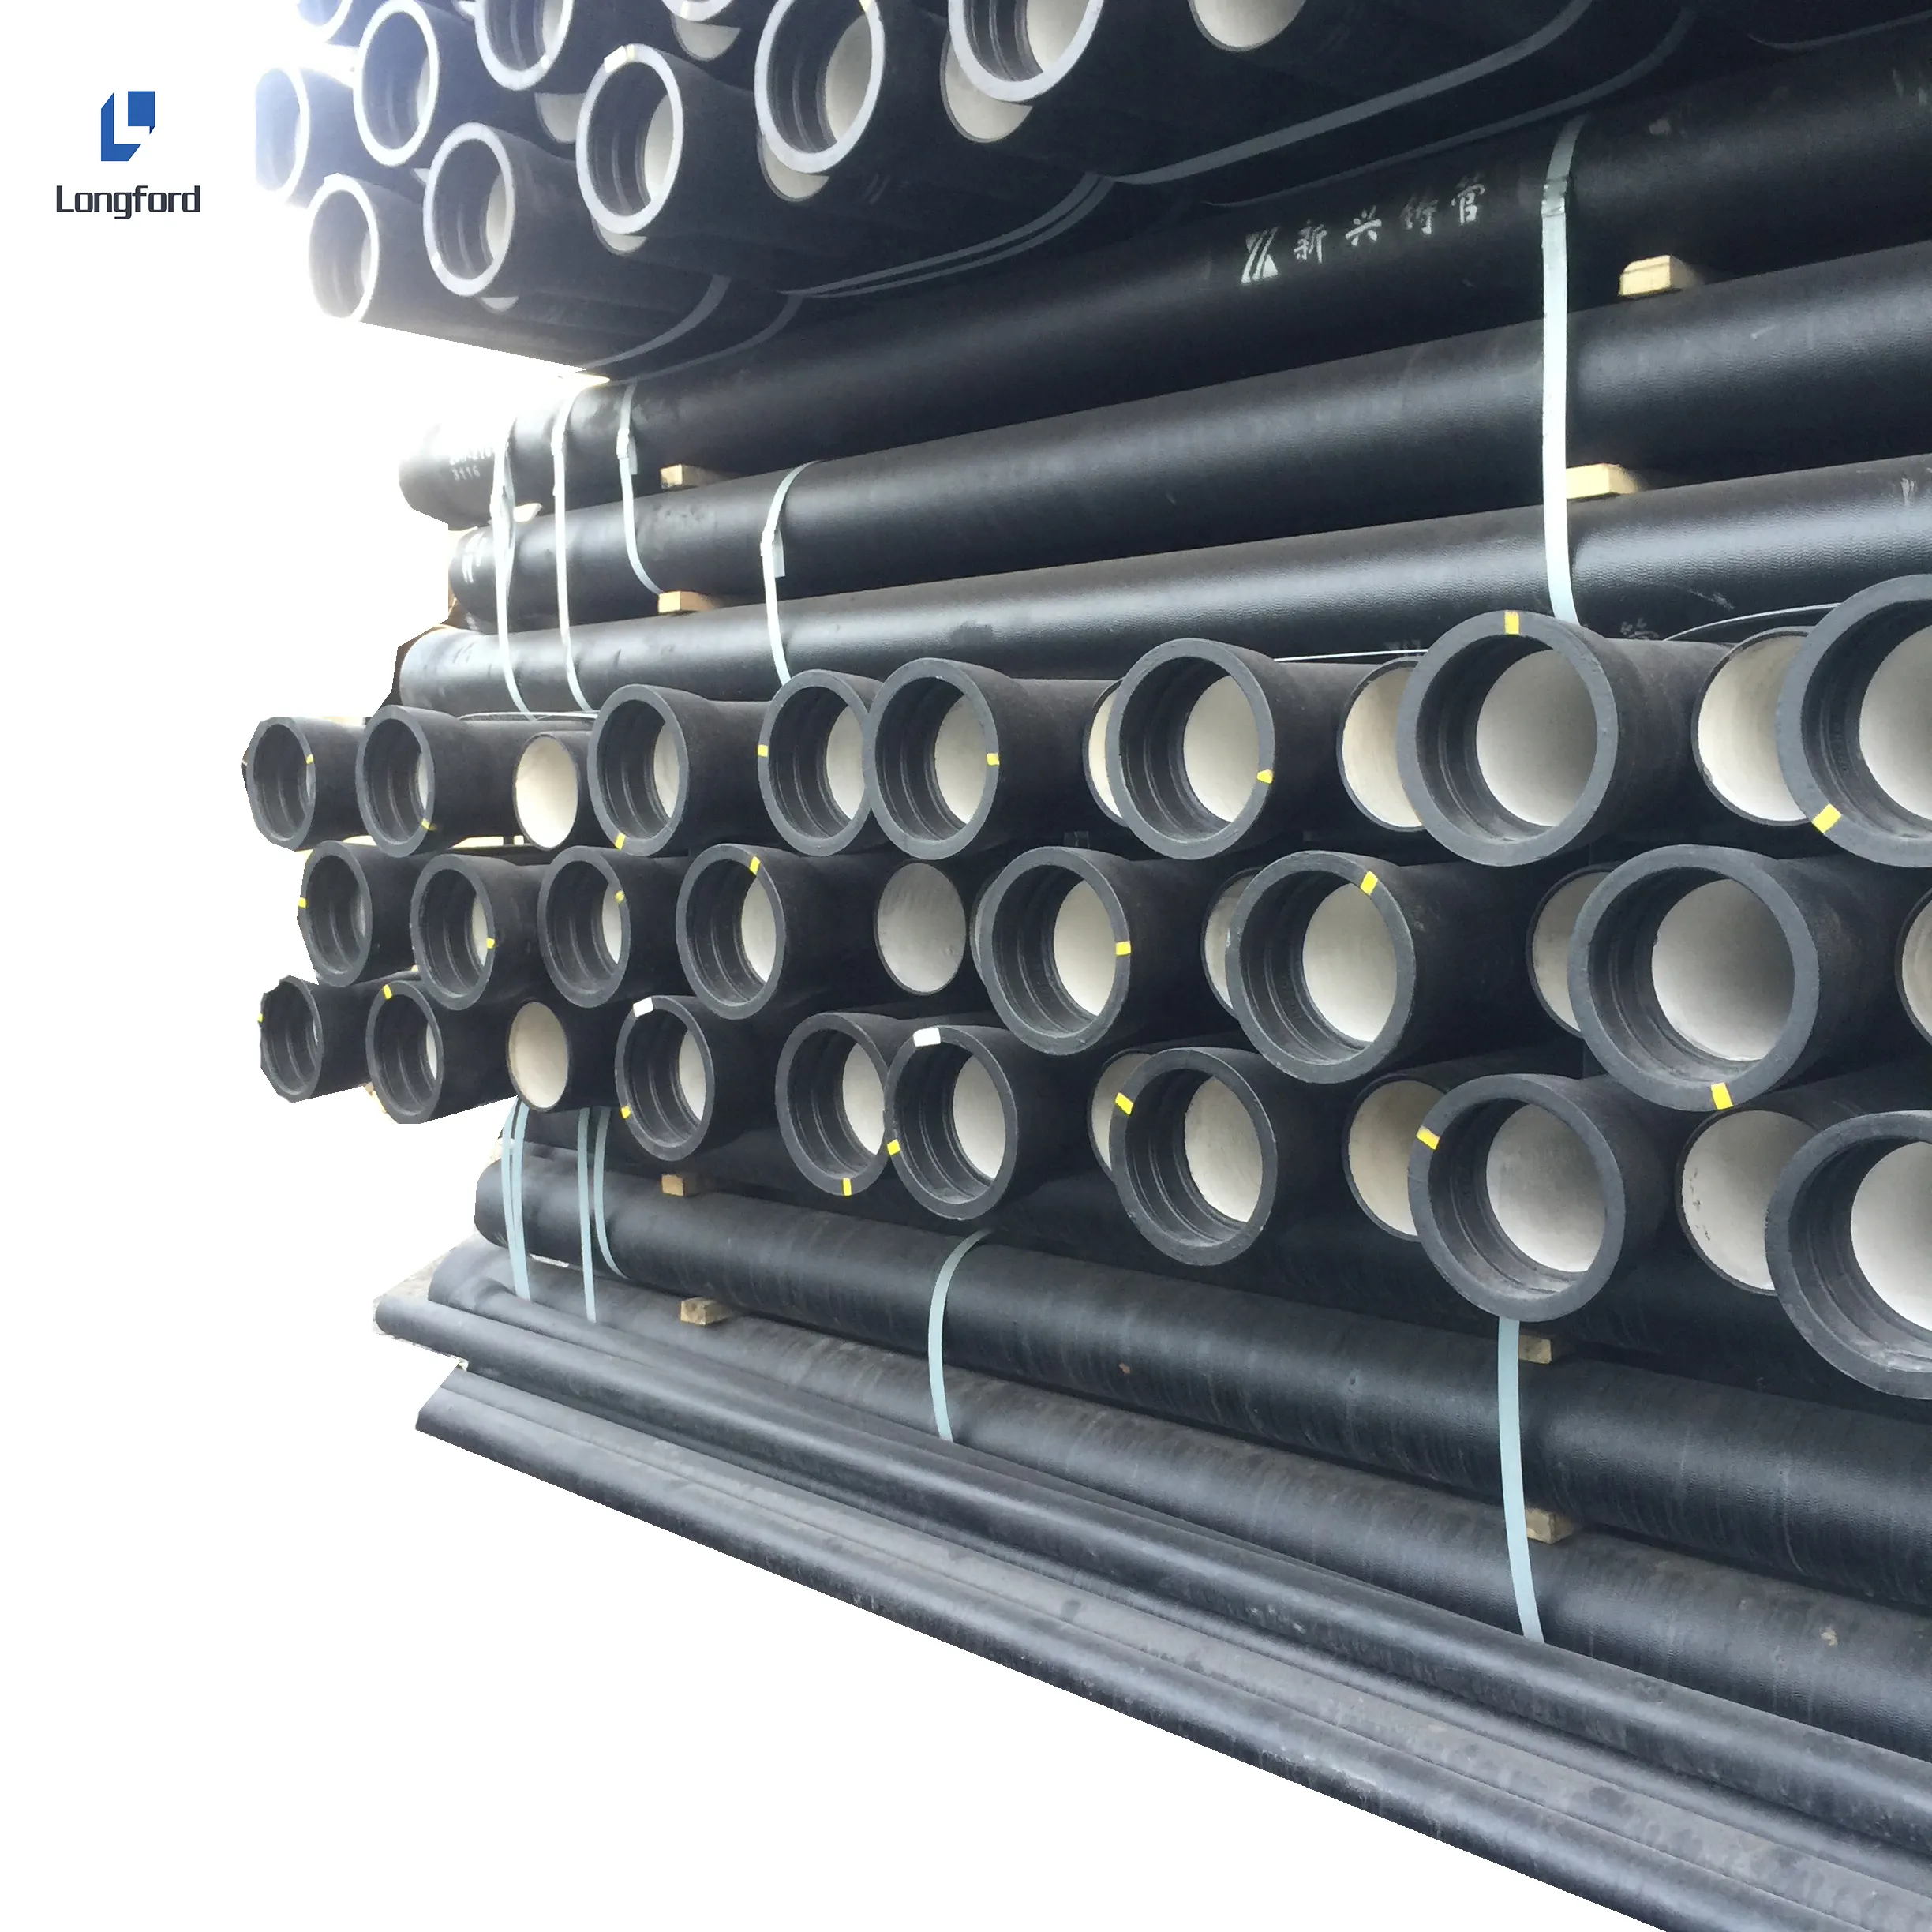 Round ISO2531 BS EN545 BS EN598 BS4772 Centrifugal ductile iron pipe K9 DN80 DN100 DN800 Bitumen Coated Ductile Cast Iron Pipe